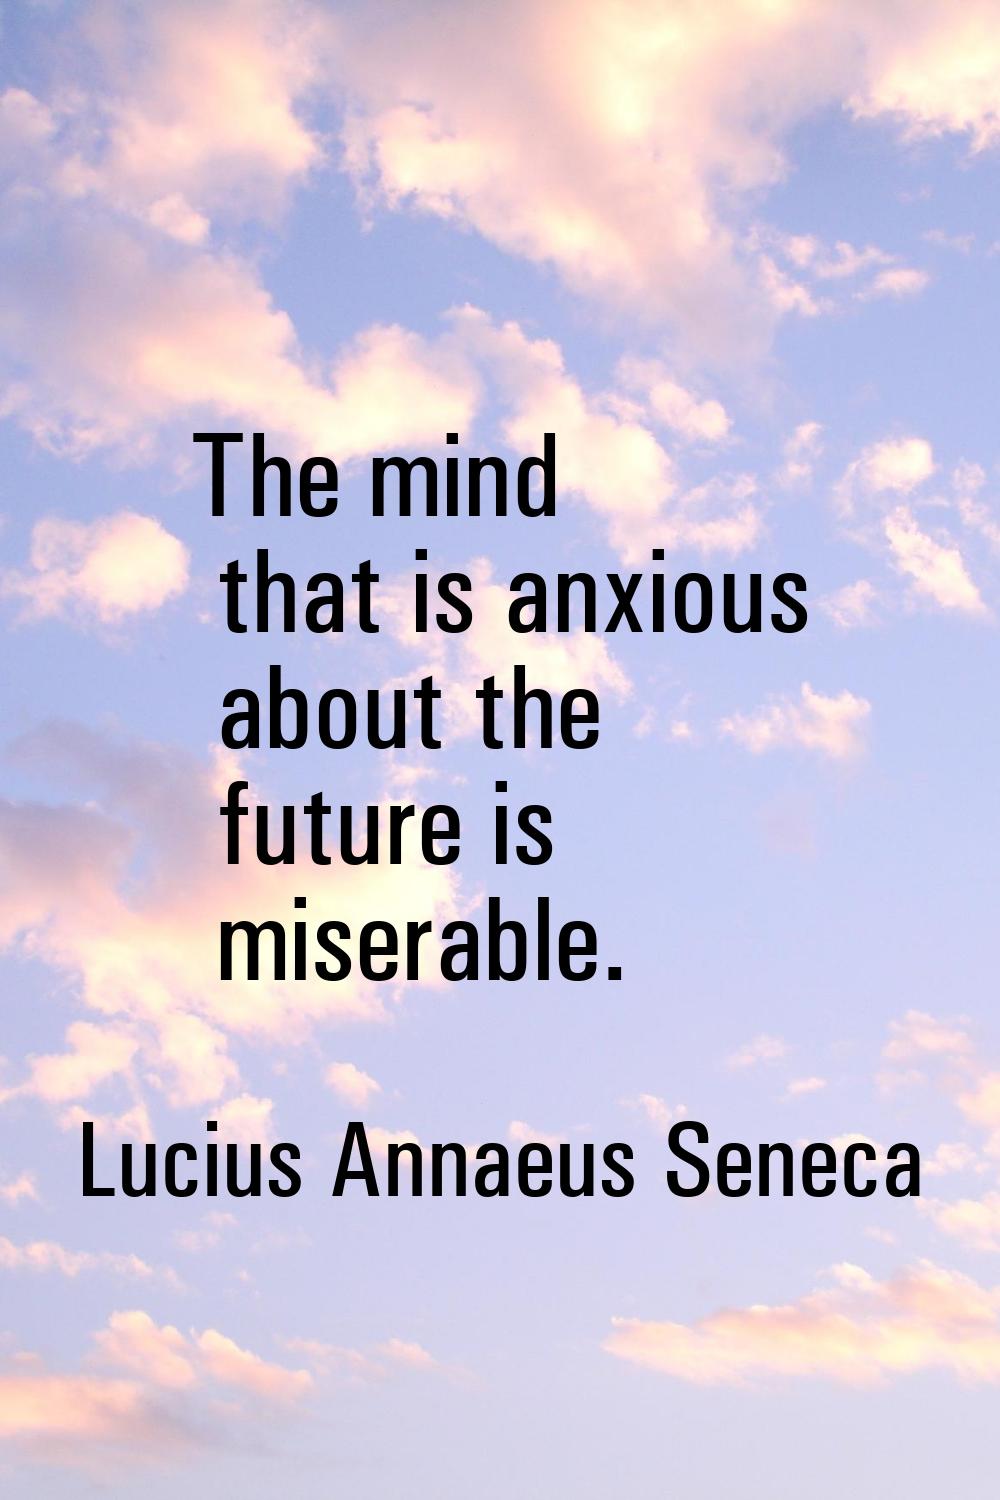 The mind that is anxious about the future is miserable.